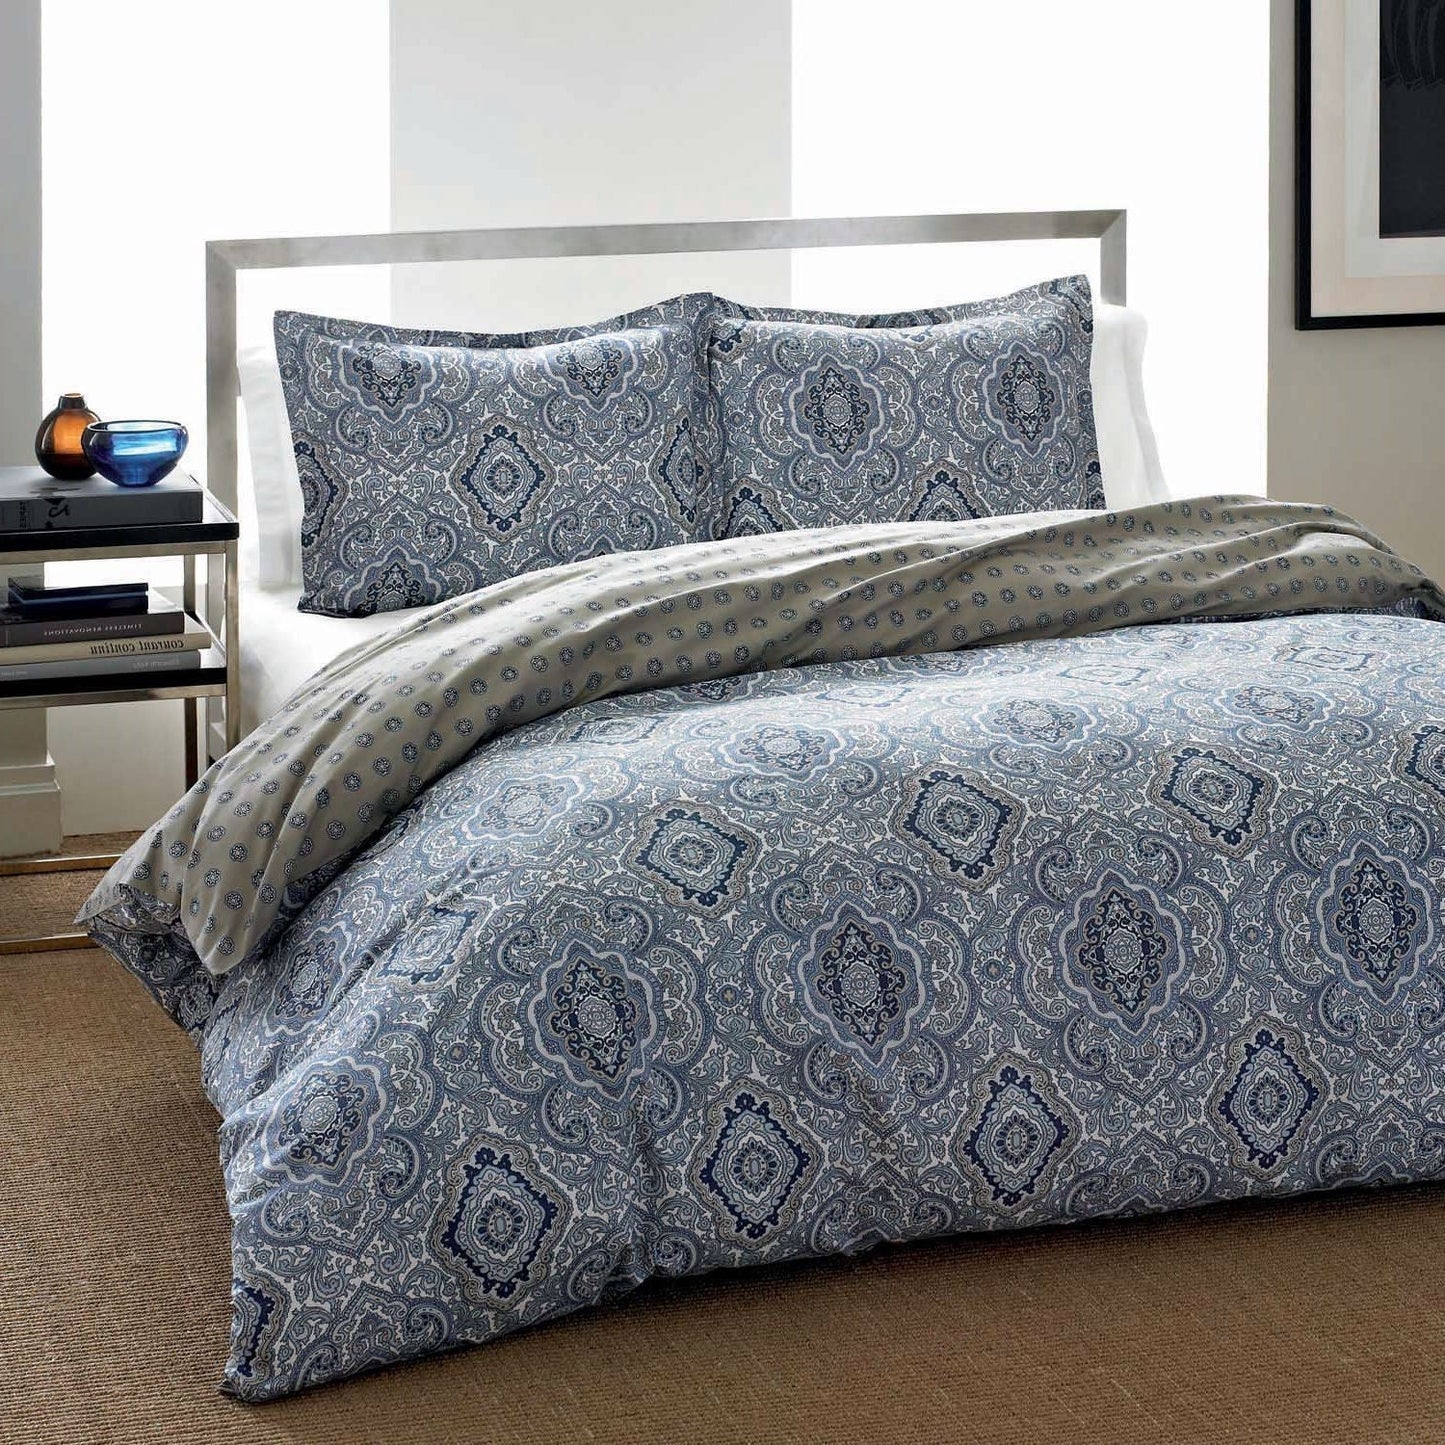 Bedroom > Comforters And Sets - King 3-Piece Cotton Comforter Set With Blue Grey Damask Pattern